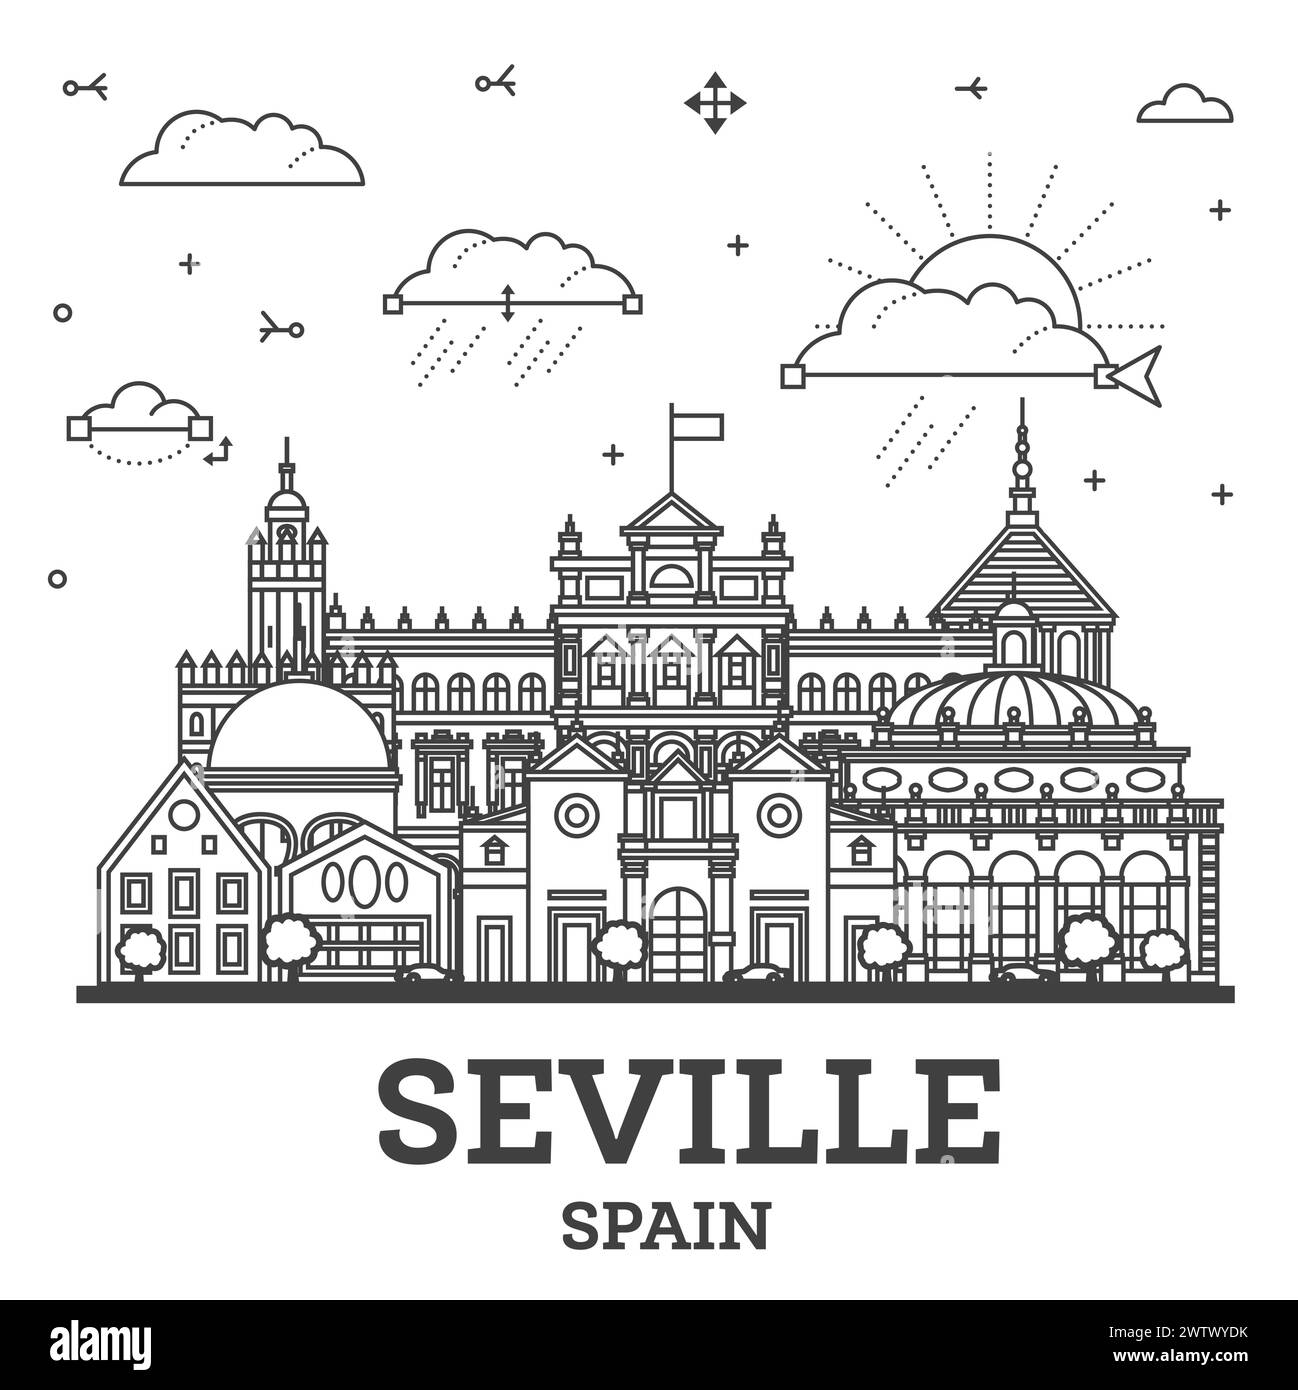 Outline Seville Spain City Skyline with Historic Buildings Isolated on White. Vector Illustration. Seville Cityscape with Landmarks. Stock Vector